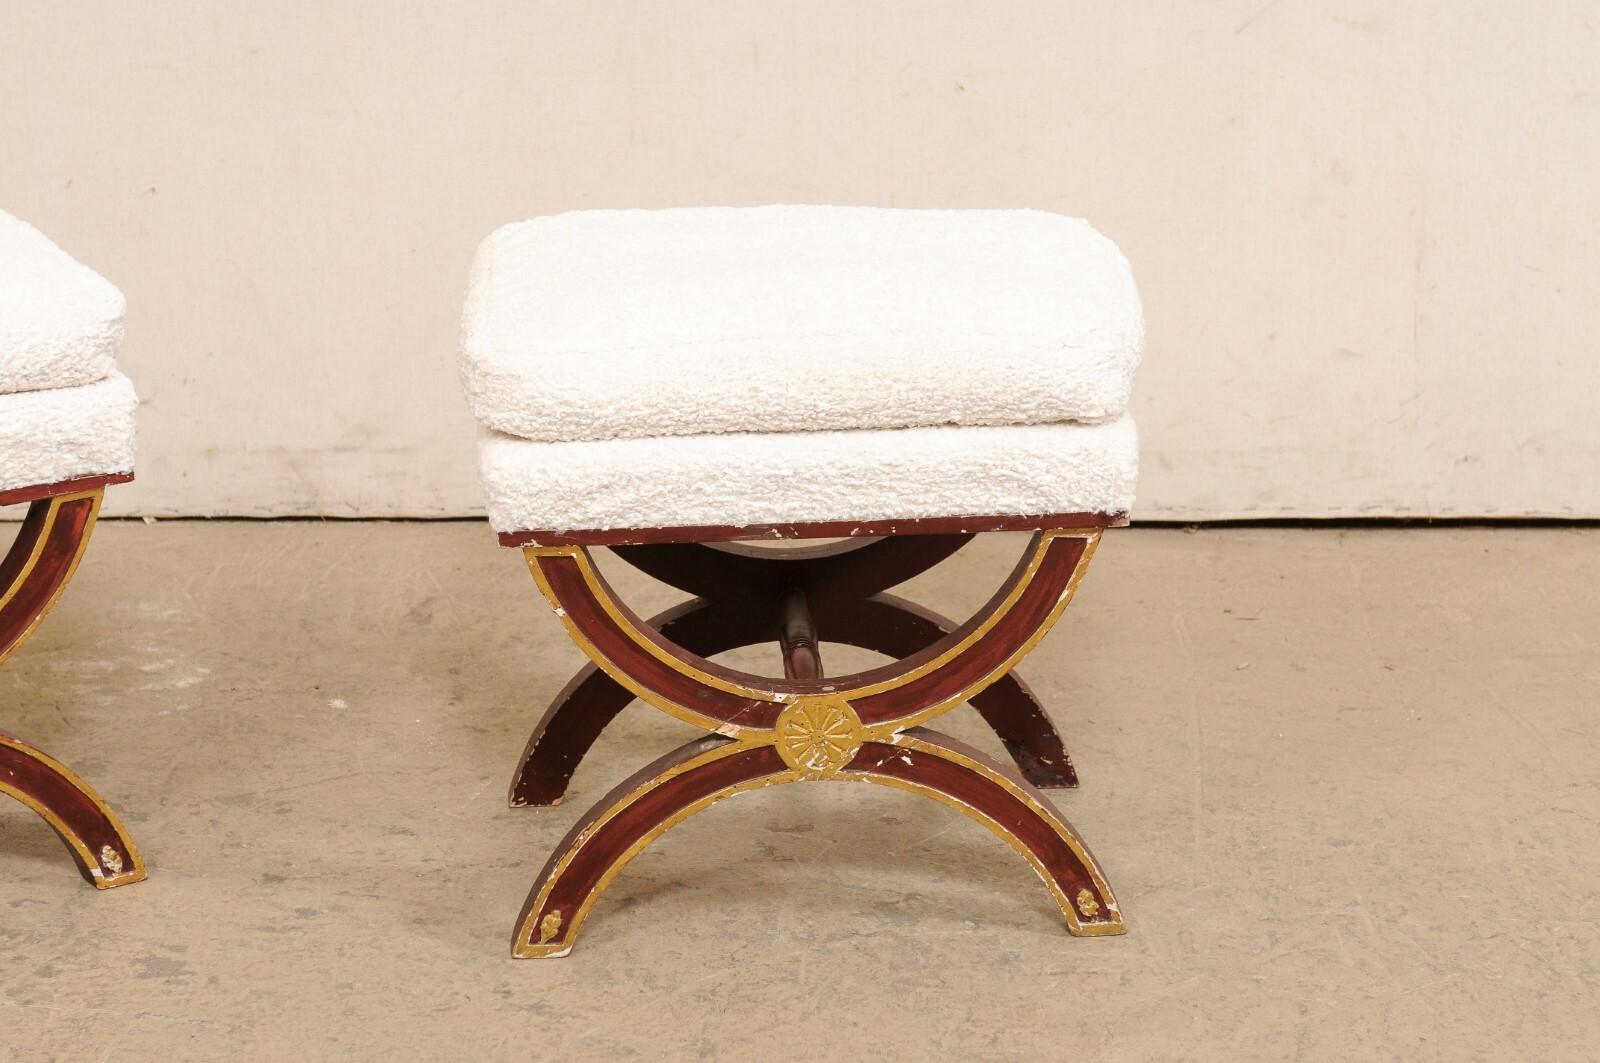 A French pair of wooden curule style stools, with upholstered seats. These vintage stools from France have been created in the Curule (or often referred to as Dante) style, featuring legs comprised of opposing two half-moon shapes, which attach at